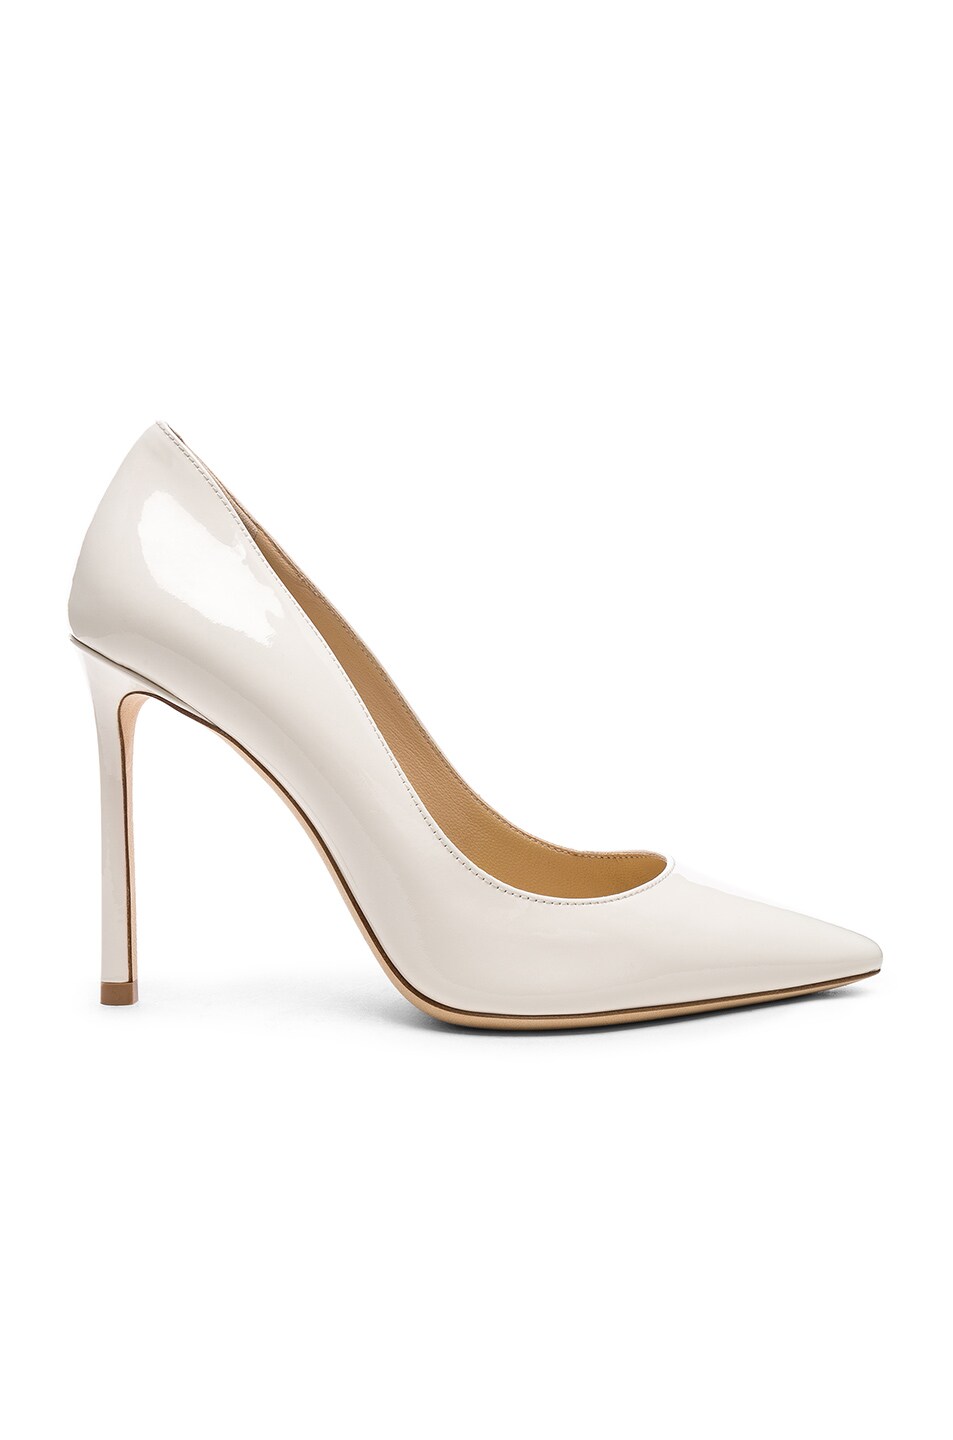 Image 1 of Jimmy Choo Romy 100 Patent Leather Heels in Chalk